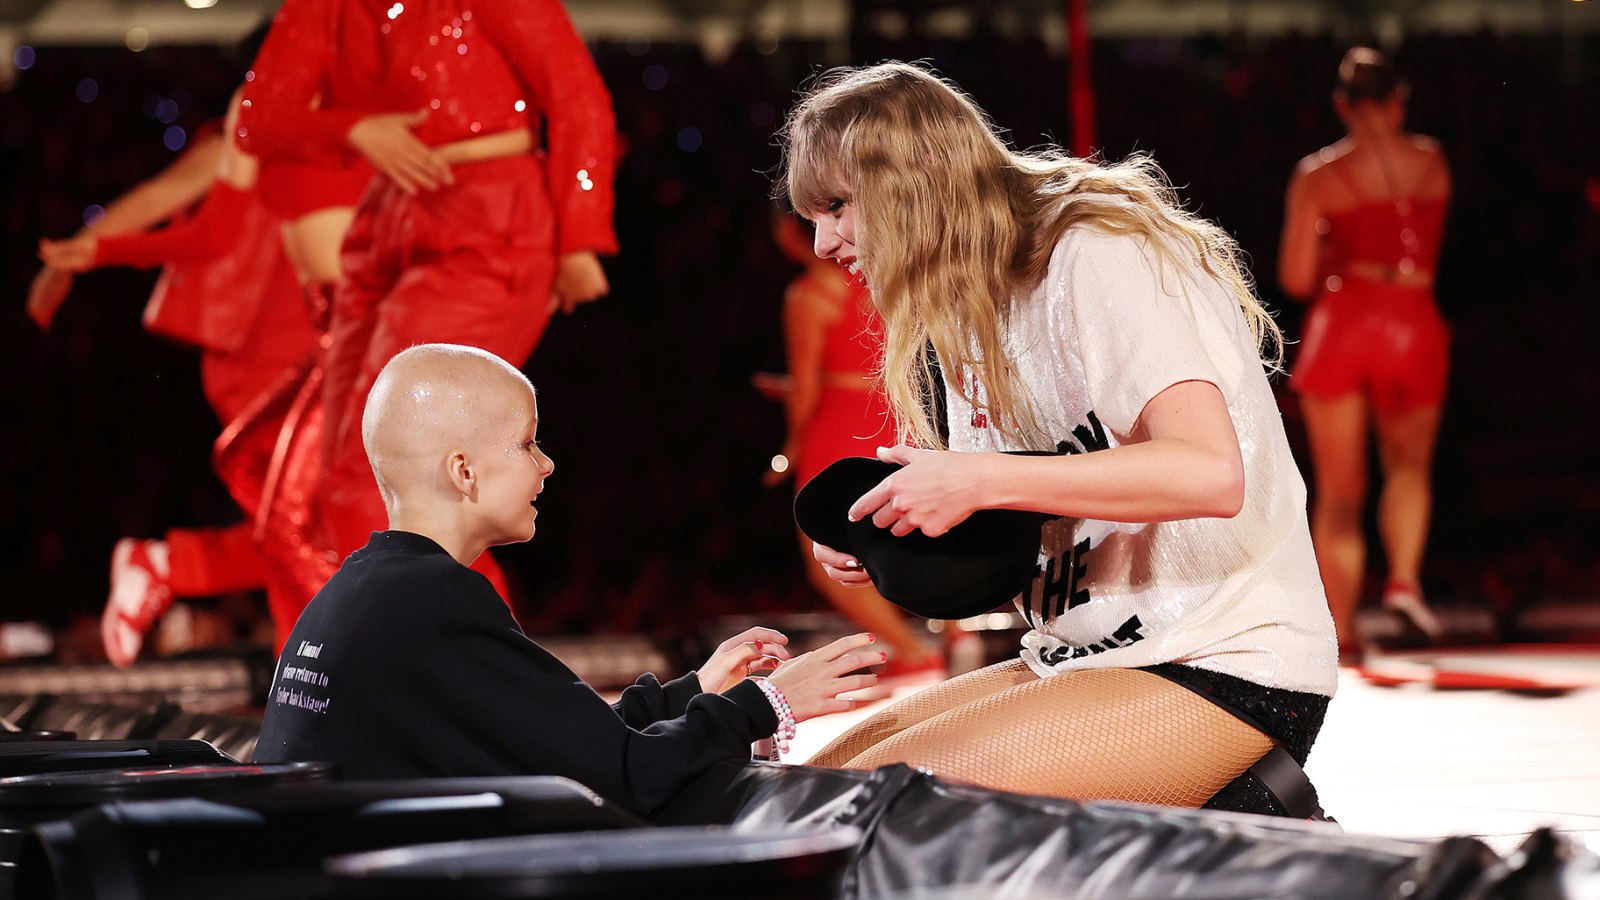 Taylor Swift Grants Wish of 9-Year-Old Girl Battling Cancer at Sydney Era’s Tour